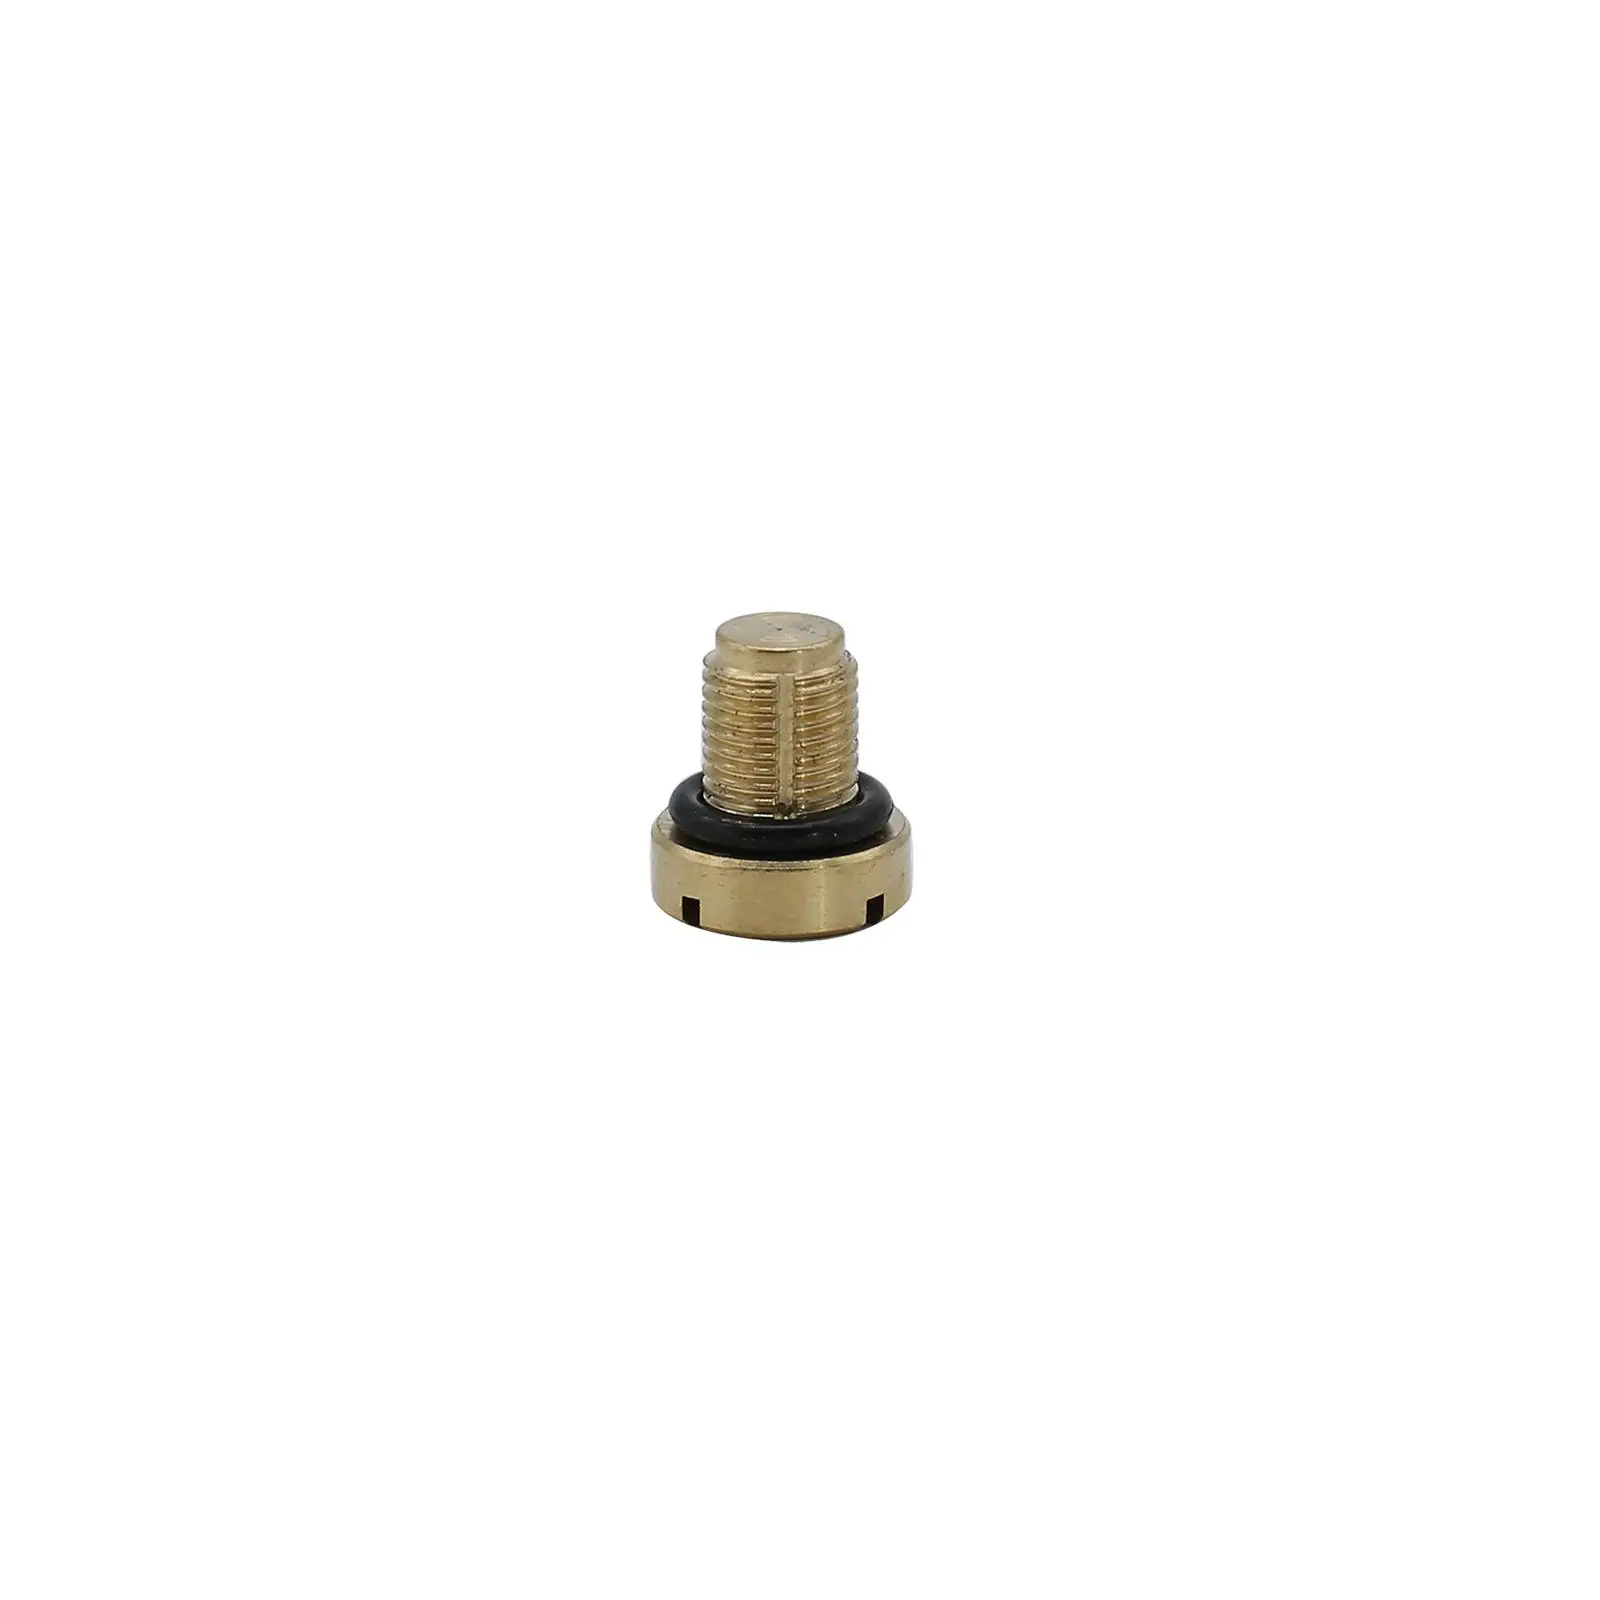 Expansion Tank Bleeder Screw Vehicle for BMW E36 M5 1991-2003